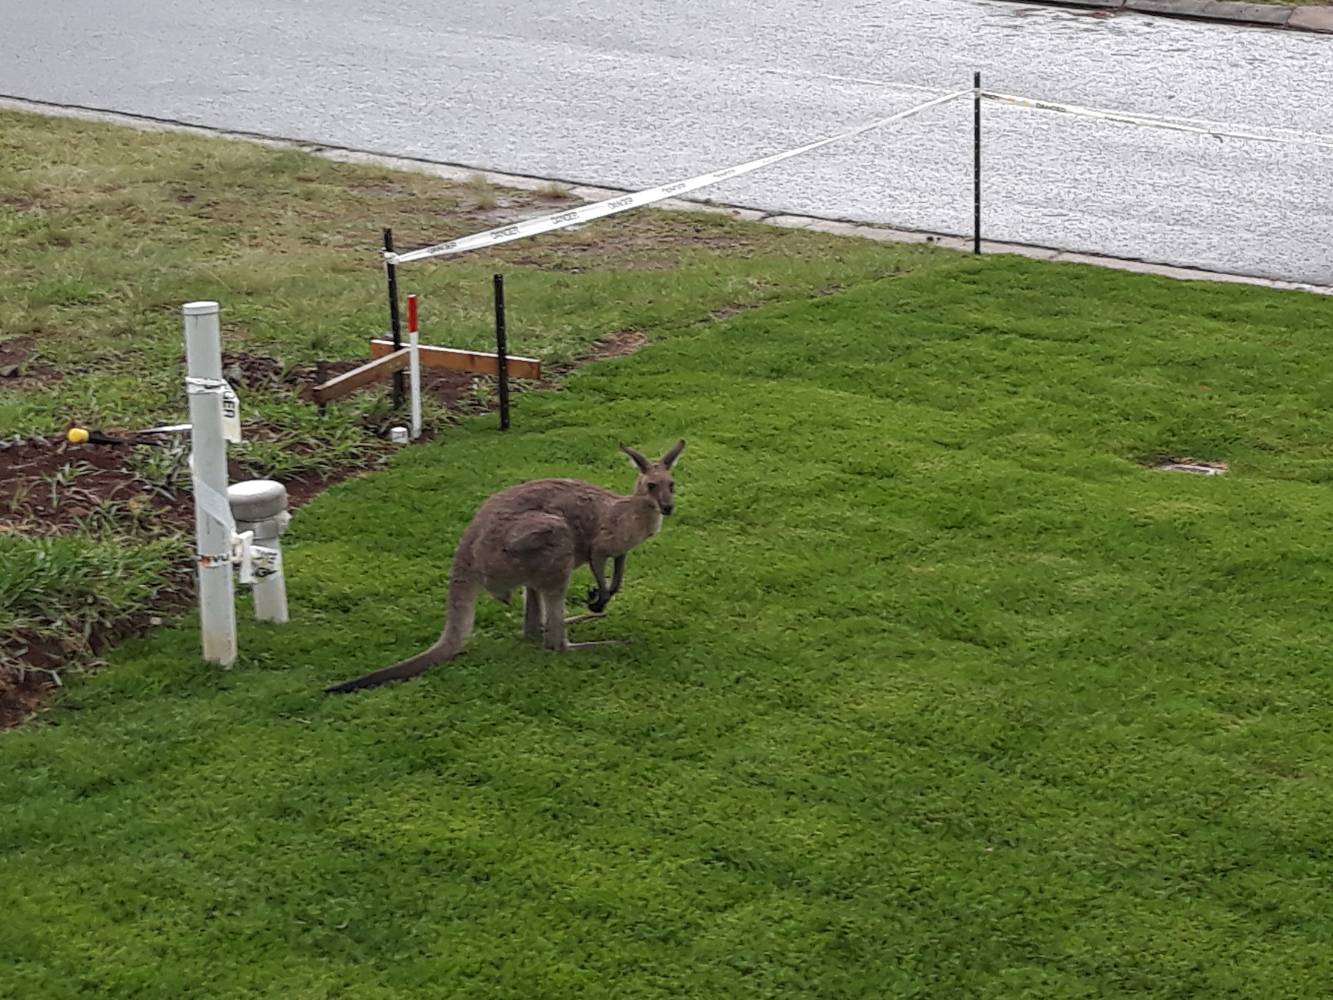 Sometimes we will get a visit from a kangaroo!